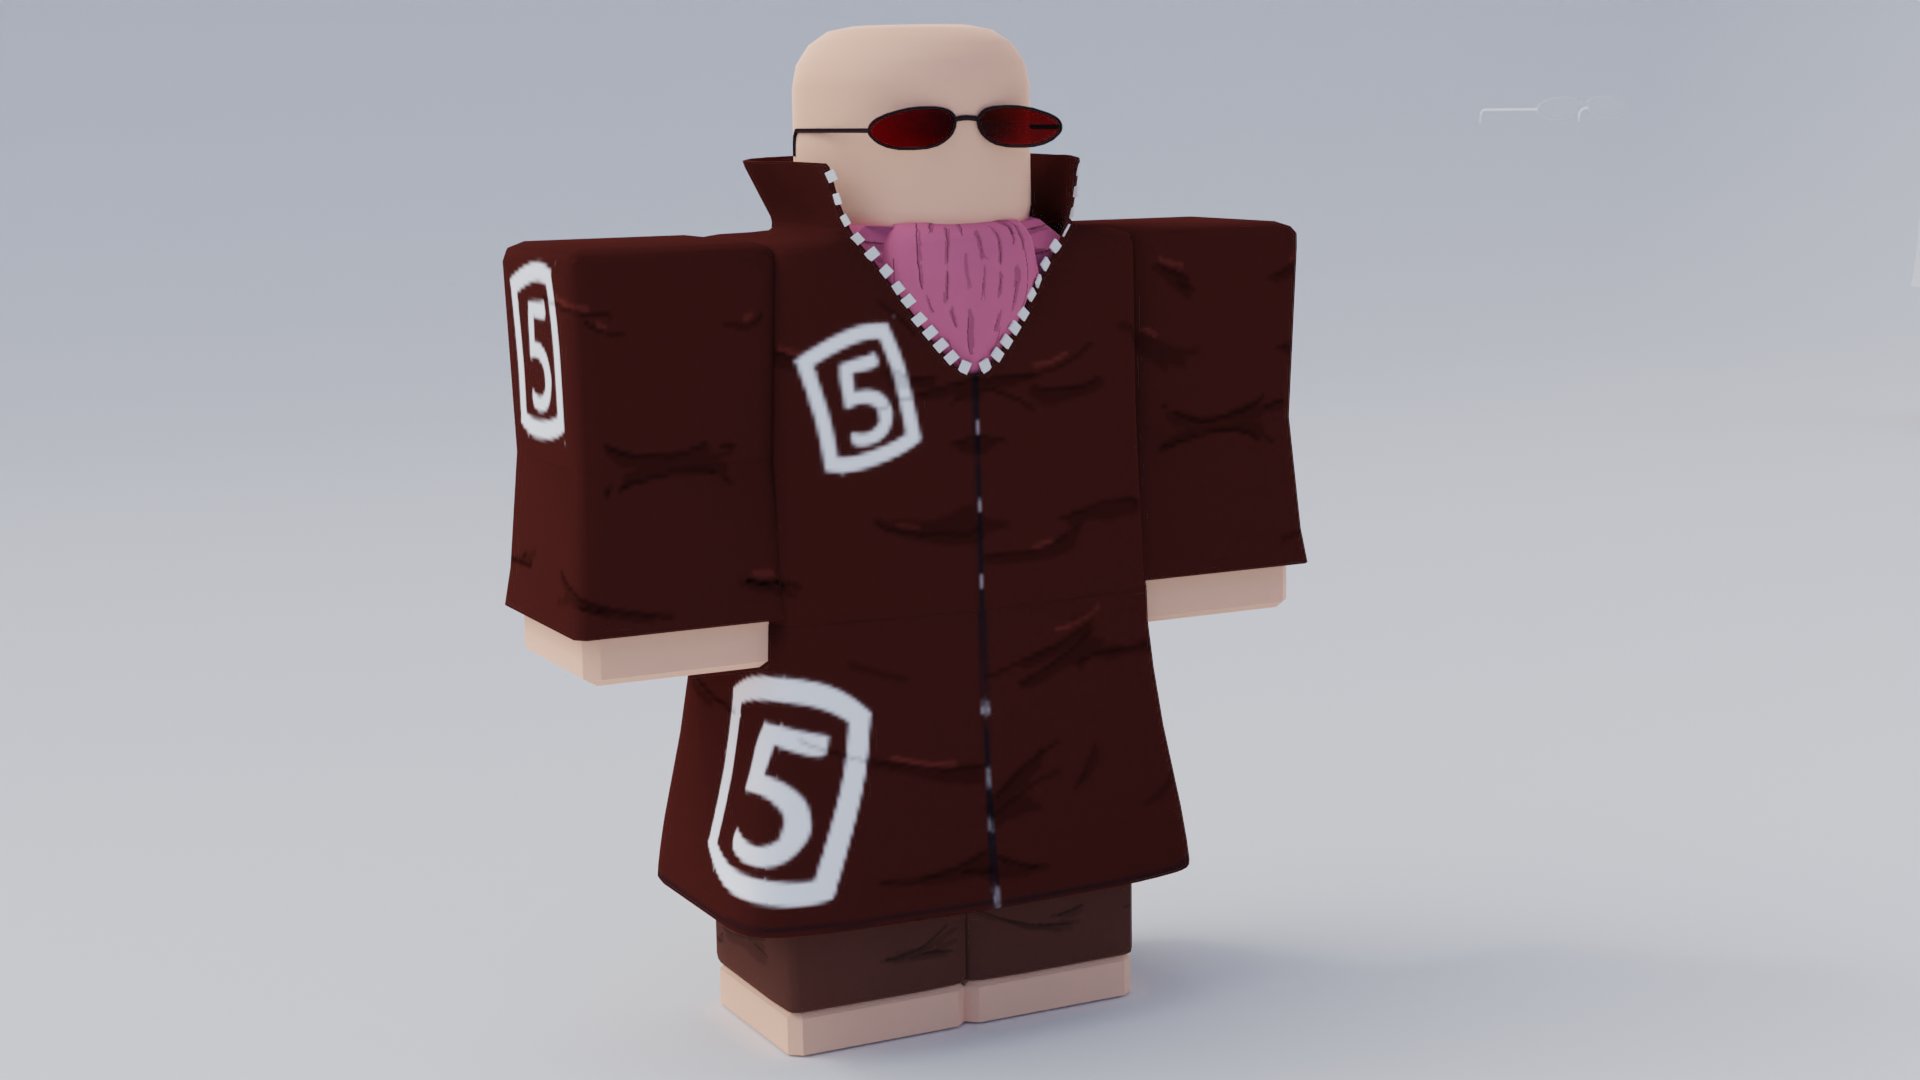 Fuzzy Mr 5 From One Piece Clothes Roblox Robloxdev T Co 0e4mb9fiun Twitter